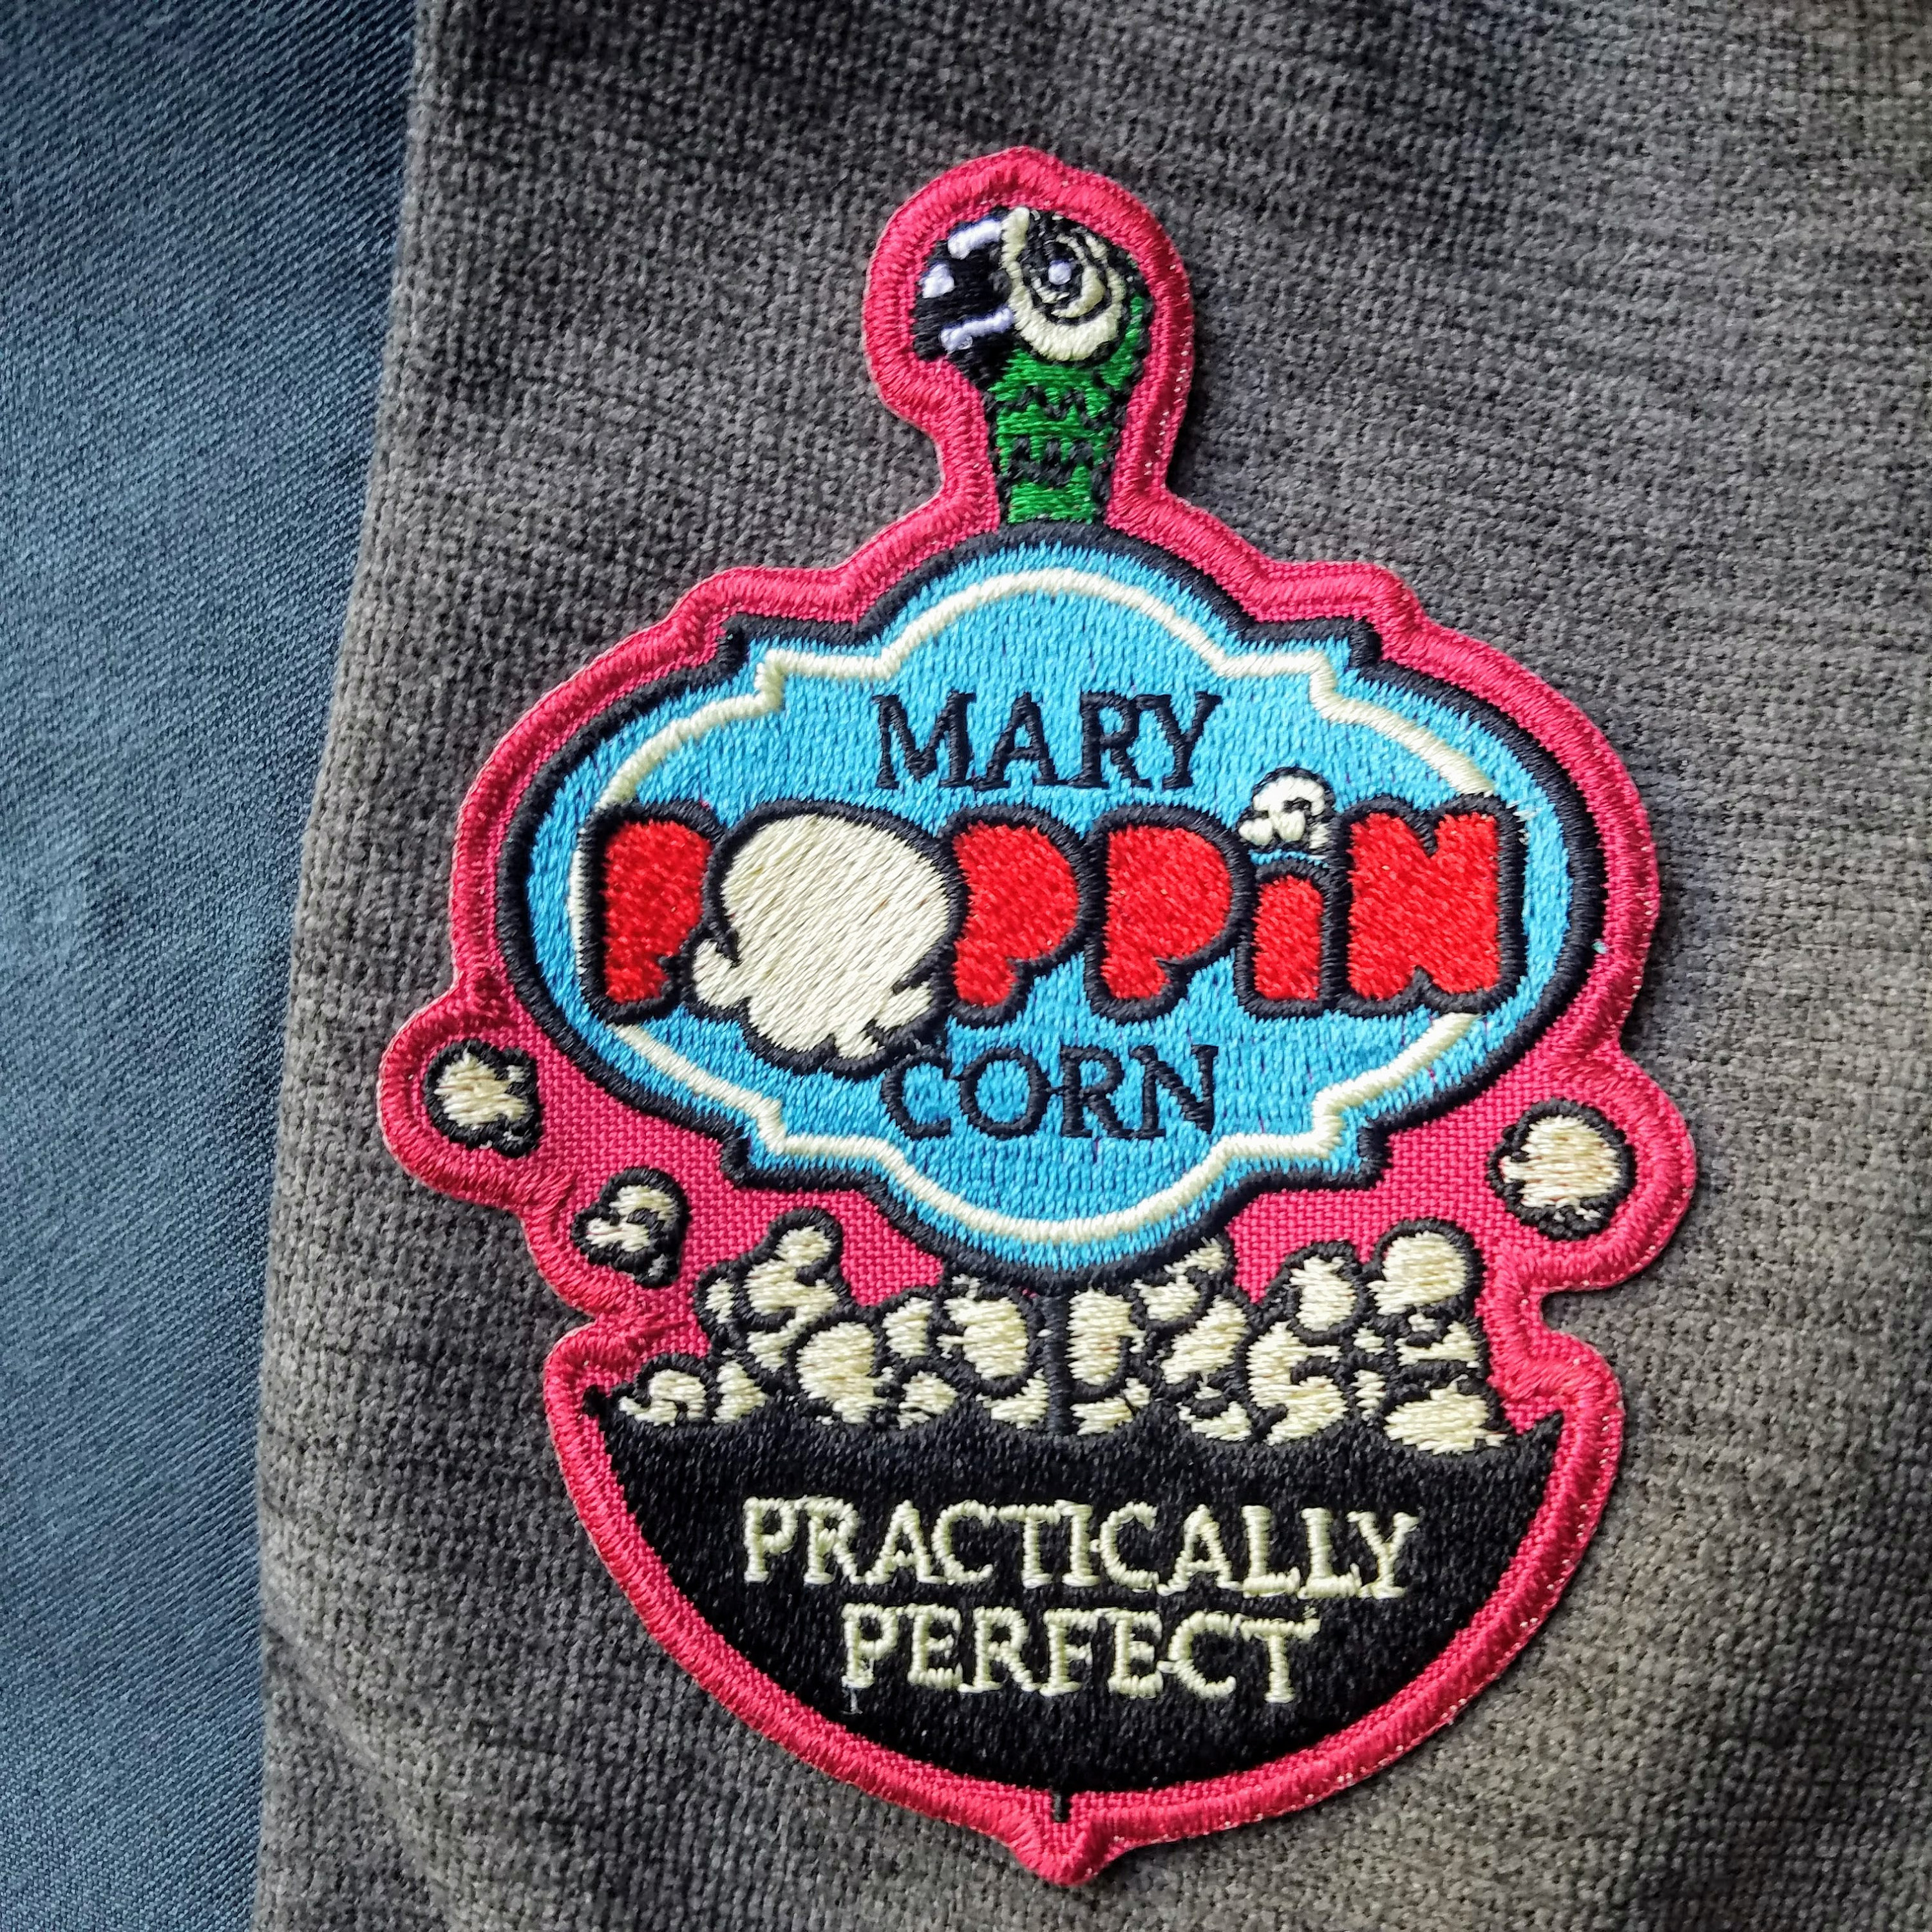 Mary Poppin' Corn Disney's Mary Poppins Inspired Iron on Applique Patch 